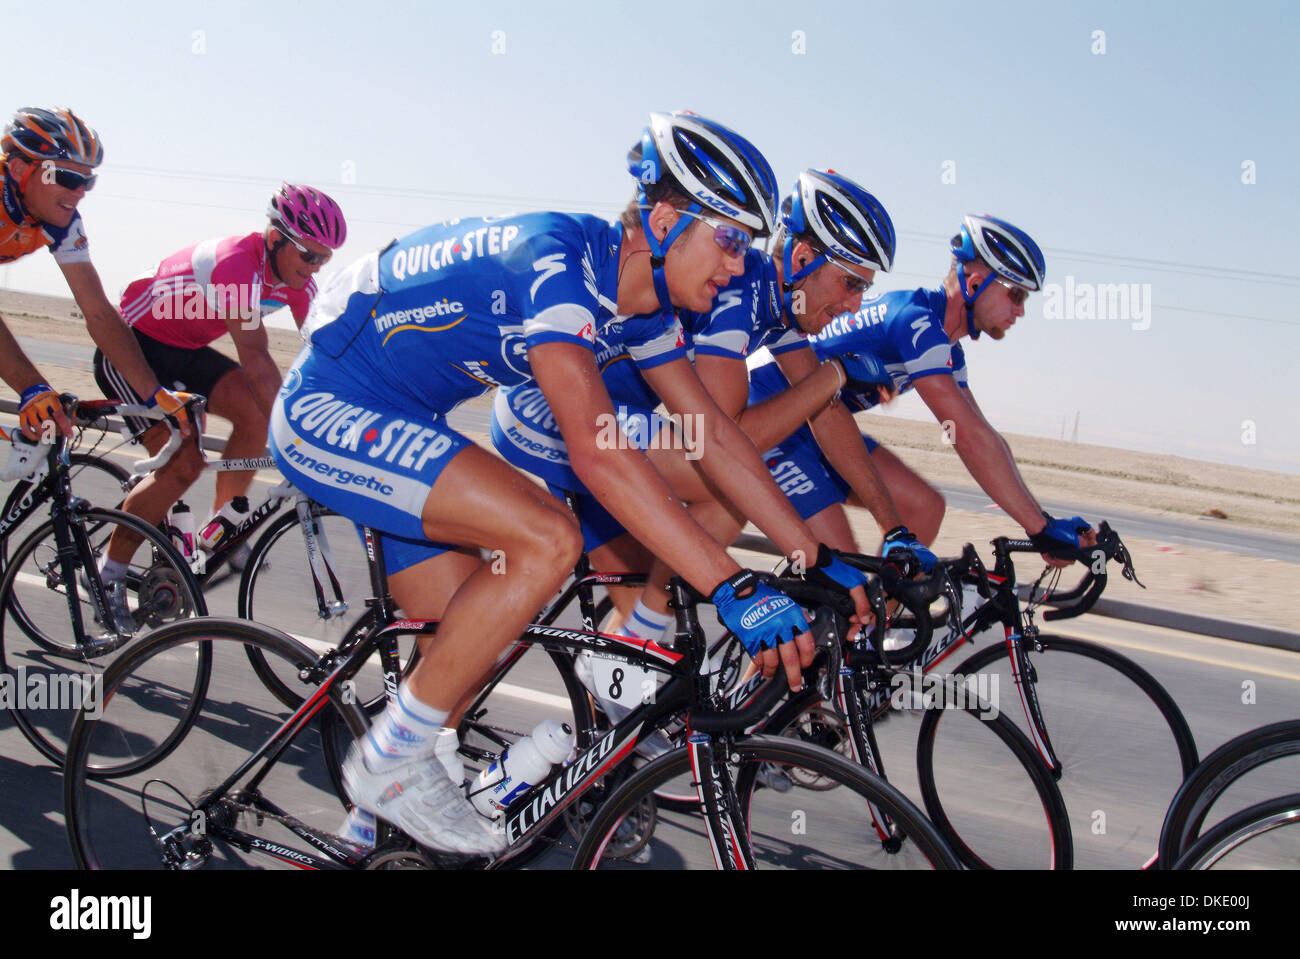 Feb 02, 2007 - Doha, Qatar - Stage 6: Sealine Beach Resort to Doha Corniche - 134 kms. For the 4th time in 6 days, Tom Boonen, once again, proved that he was the master of sprinting by claiming the final stage of the Tour of Qatar. His Quickstep team mate, Wilfried Cretskens, wins the overall classification of the event. The Tour of Qatar 2007 took place from January 28 to February Stock Photo